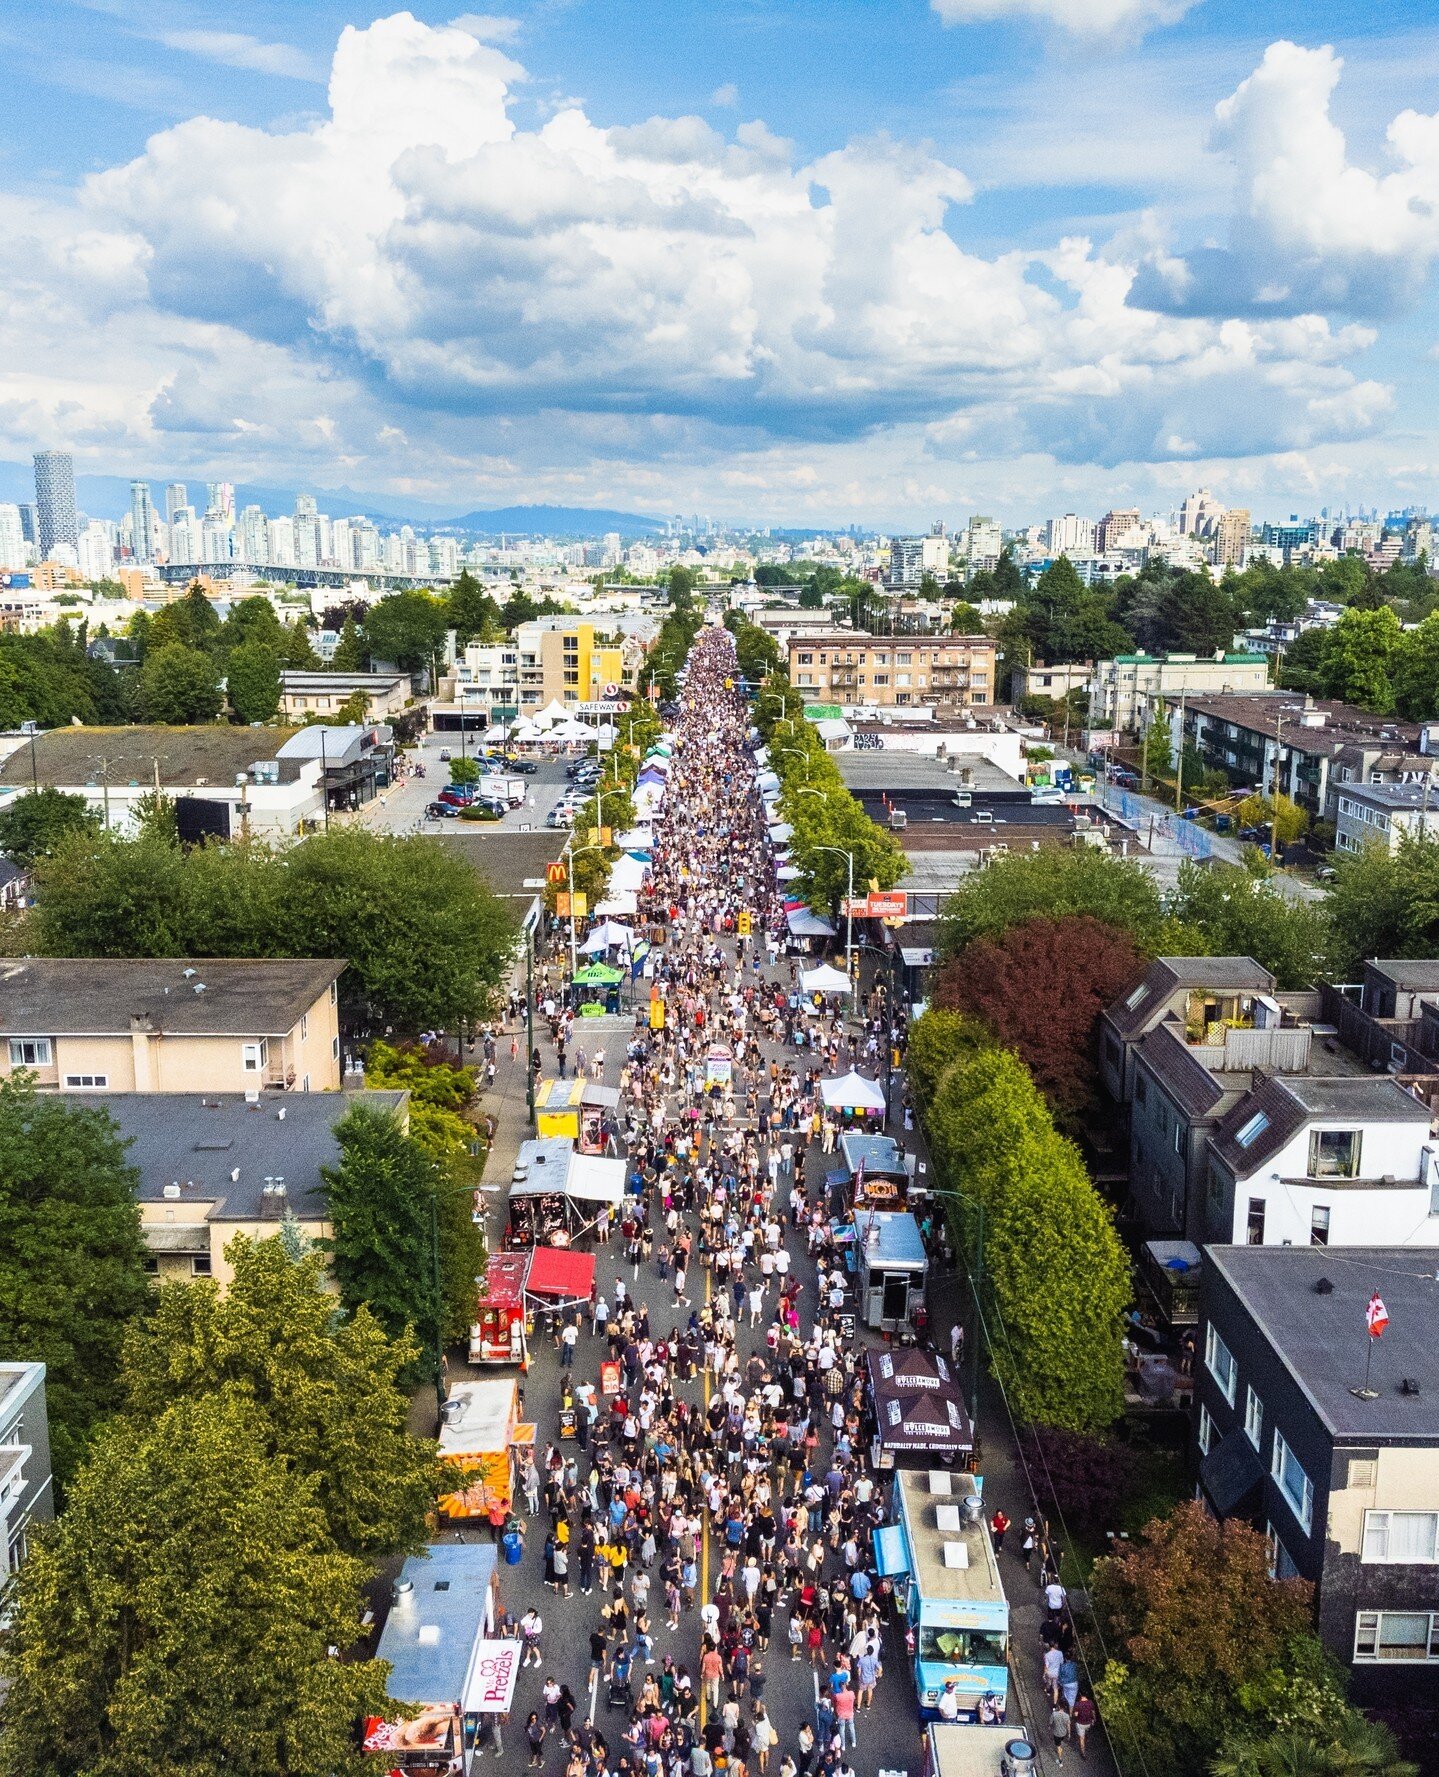 This Saturday, July 8th, we'll be setting up a booth at the Khatsahlano Street Party (@khatsahlano)! Come by to say hi to our team, and learn more about our exhibitions and programs. Also be sure to and grab some free MOV swag. 🤩⁠
⁠
At our booth, we